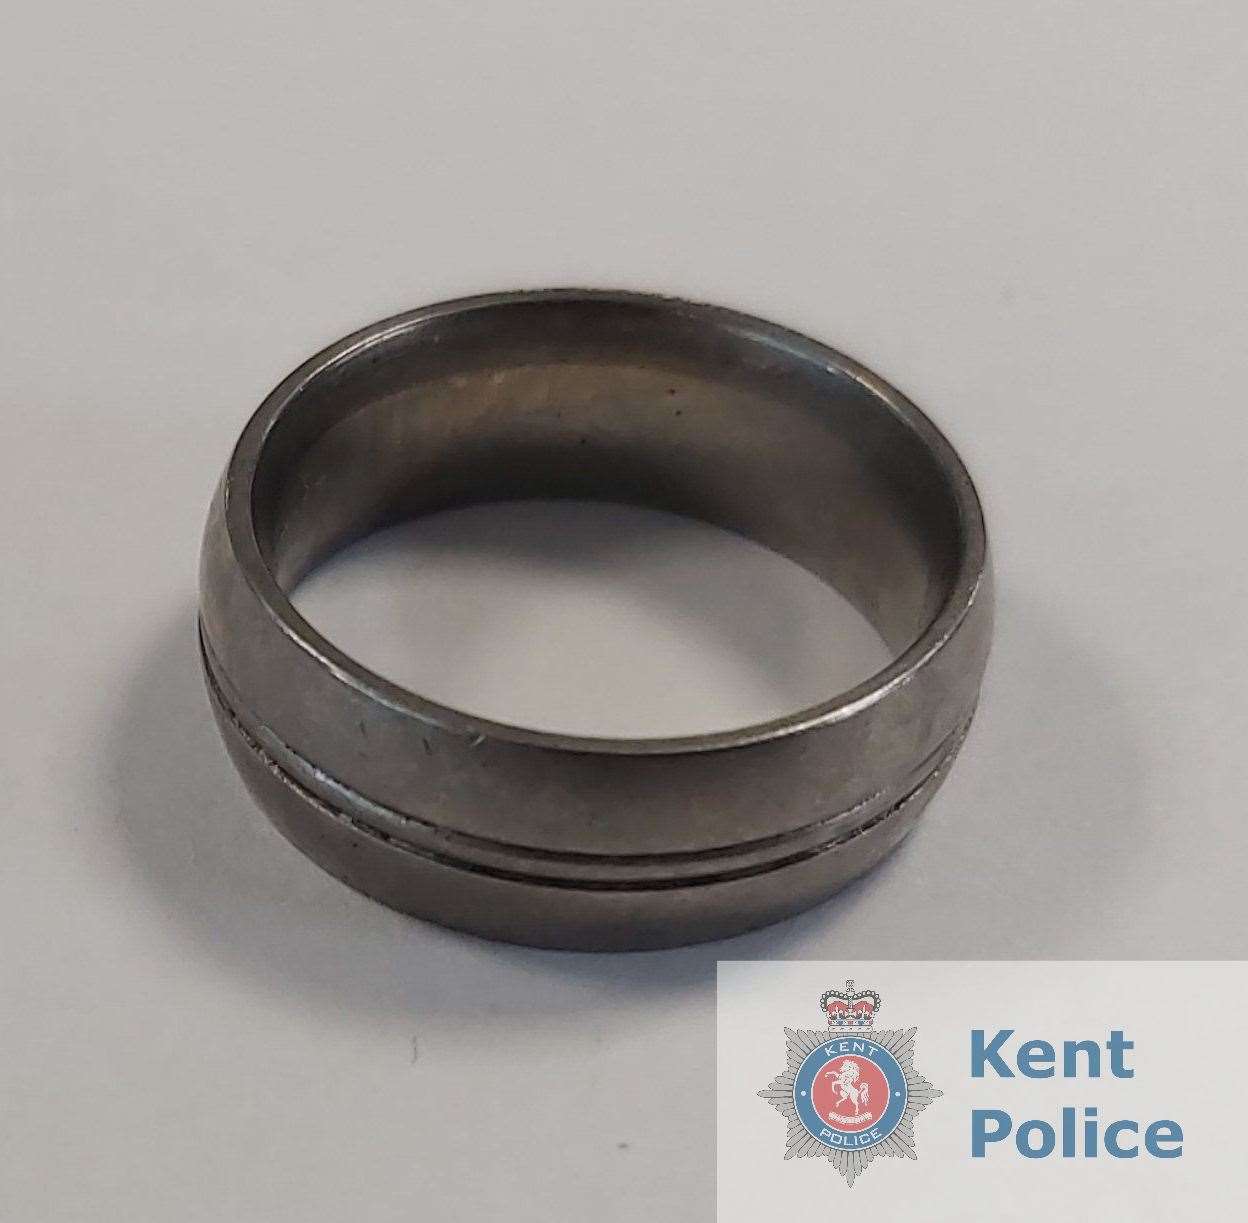 Plain ring recovered by police in Bensted, Ashford